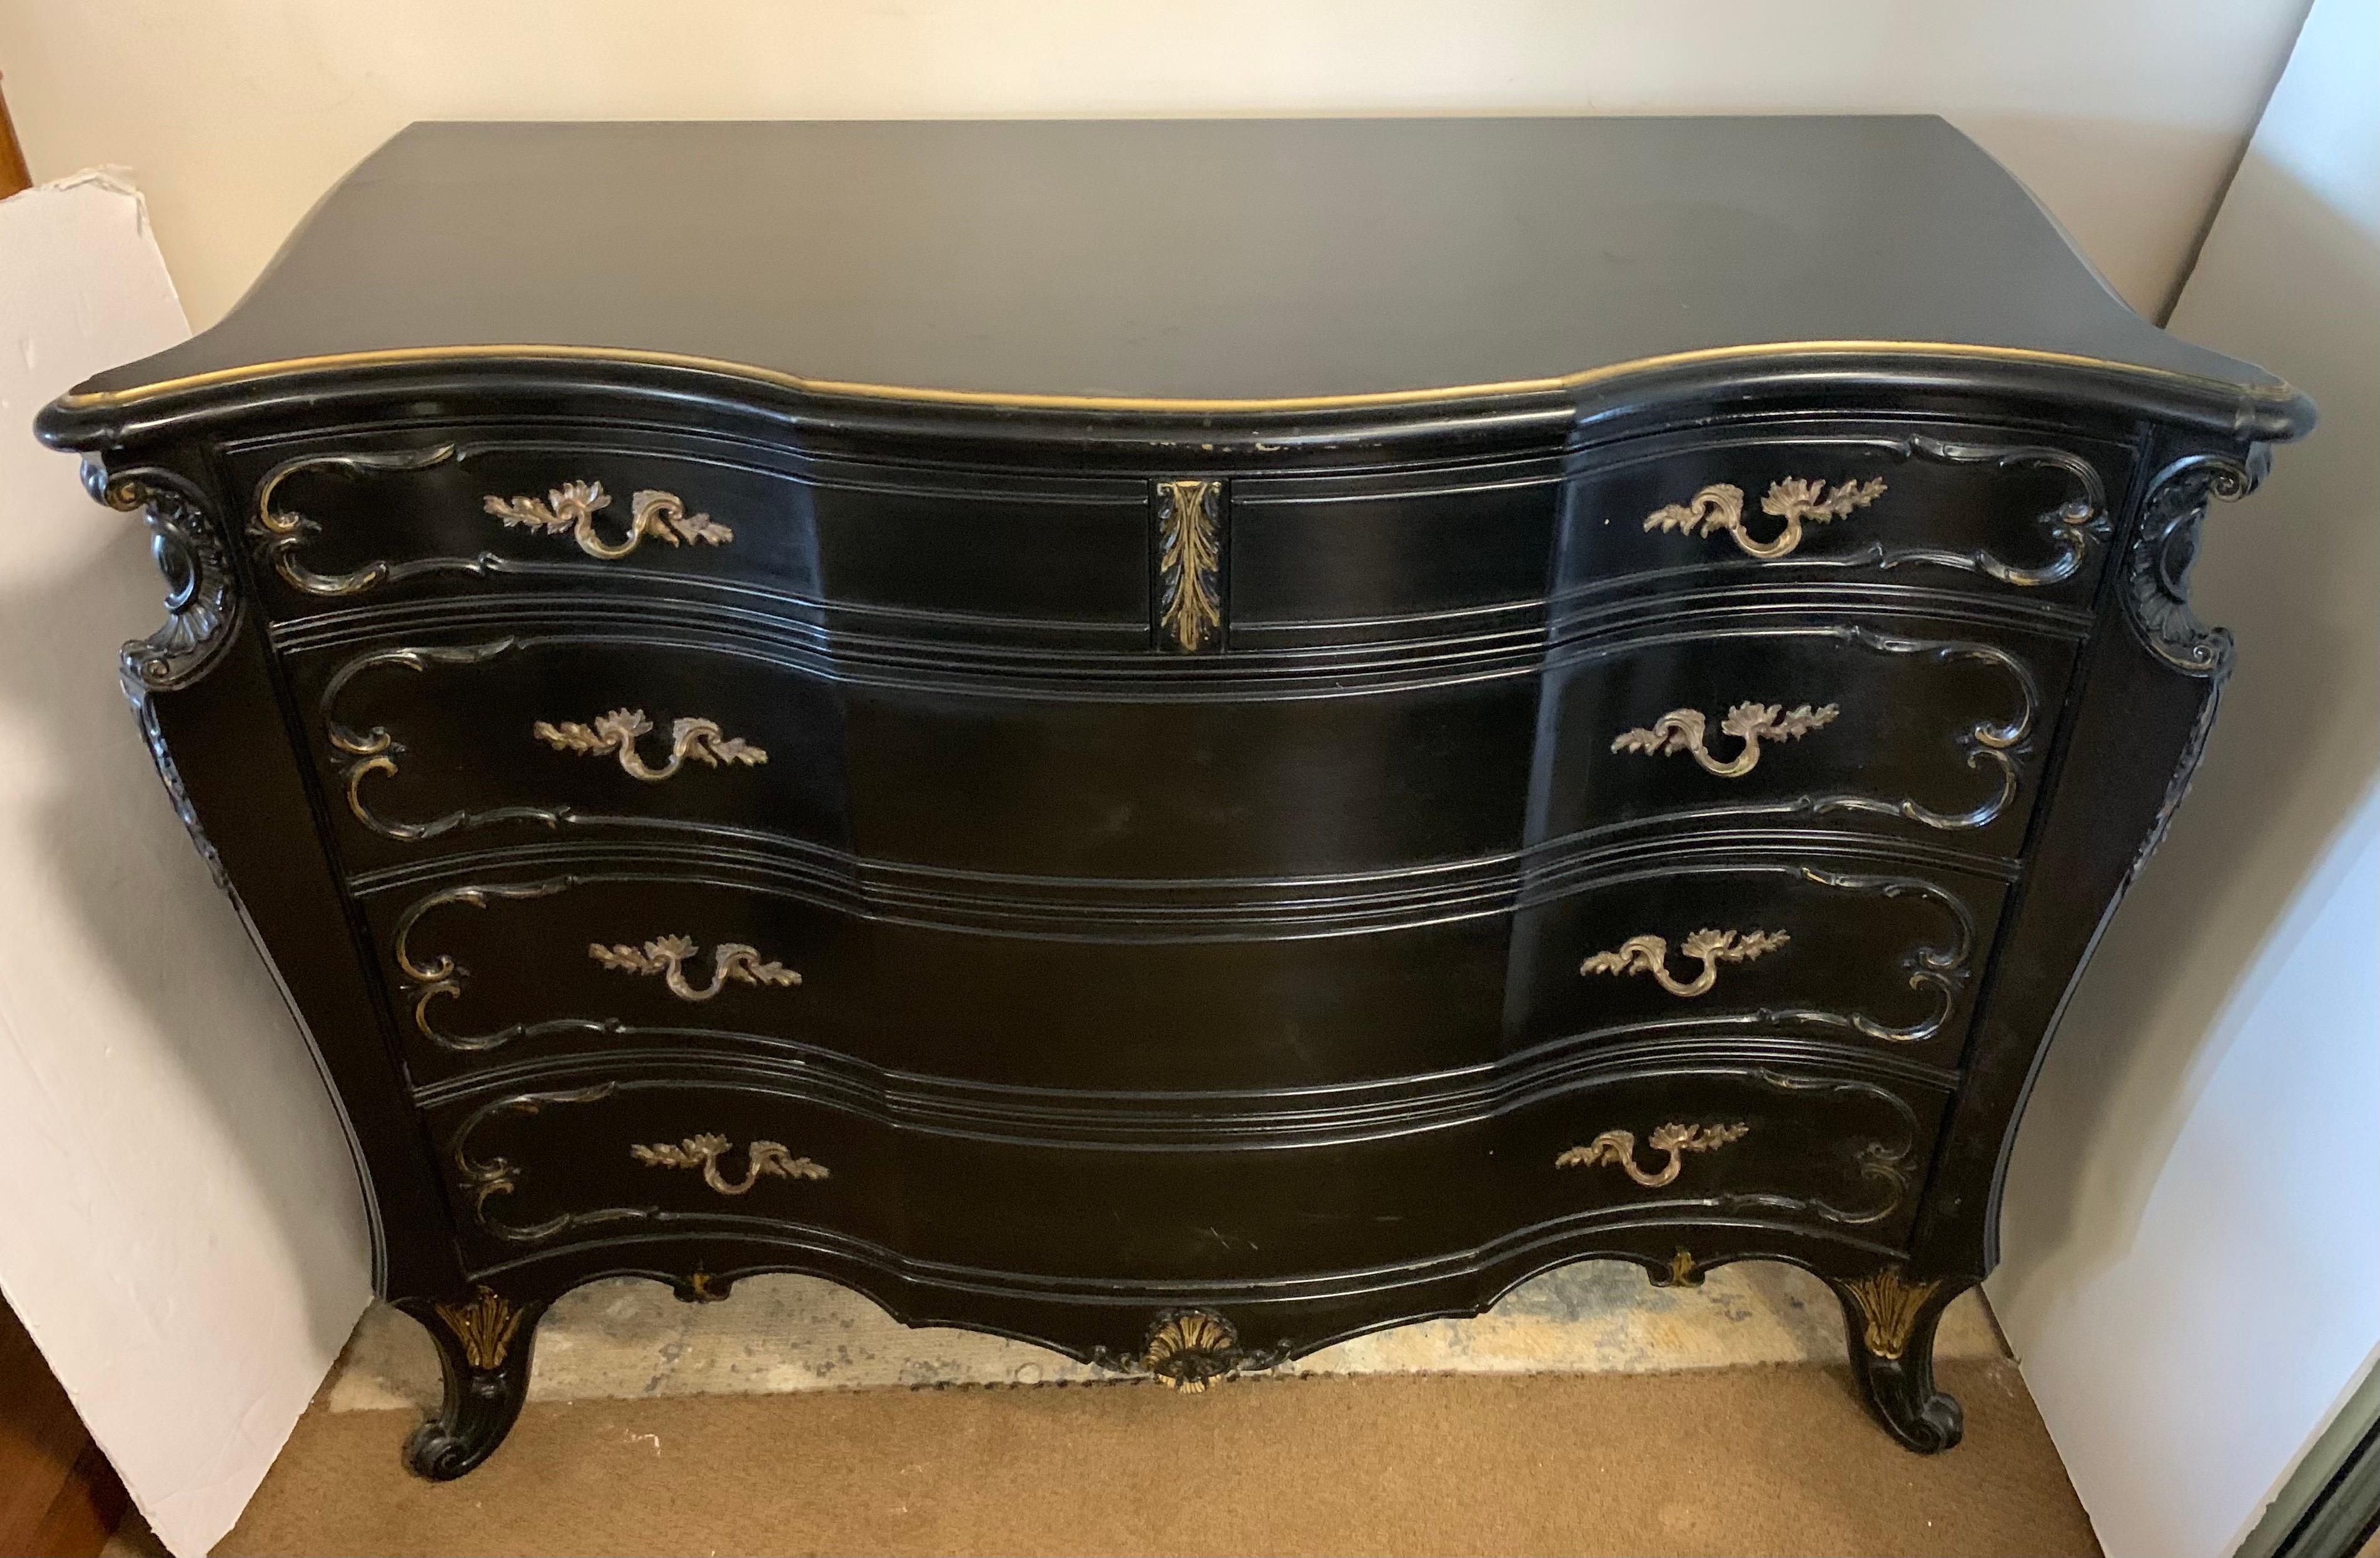 This fine quality vintage French style dresser has been refreshed with black paint and gold accents. It has four dovetailed drawers. Would look great in a foyer or bedroom.
 